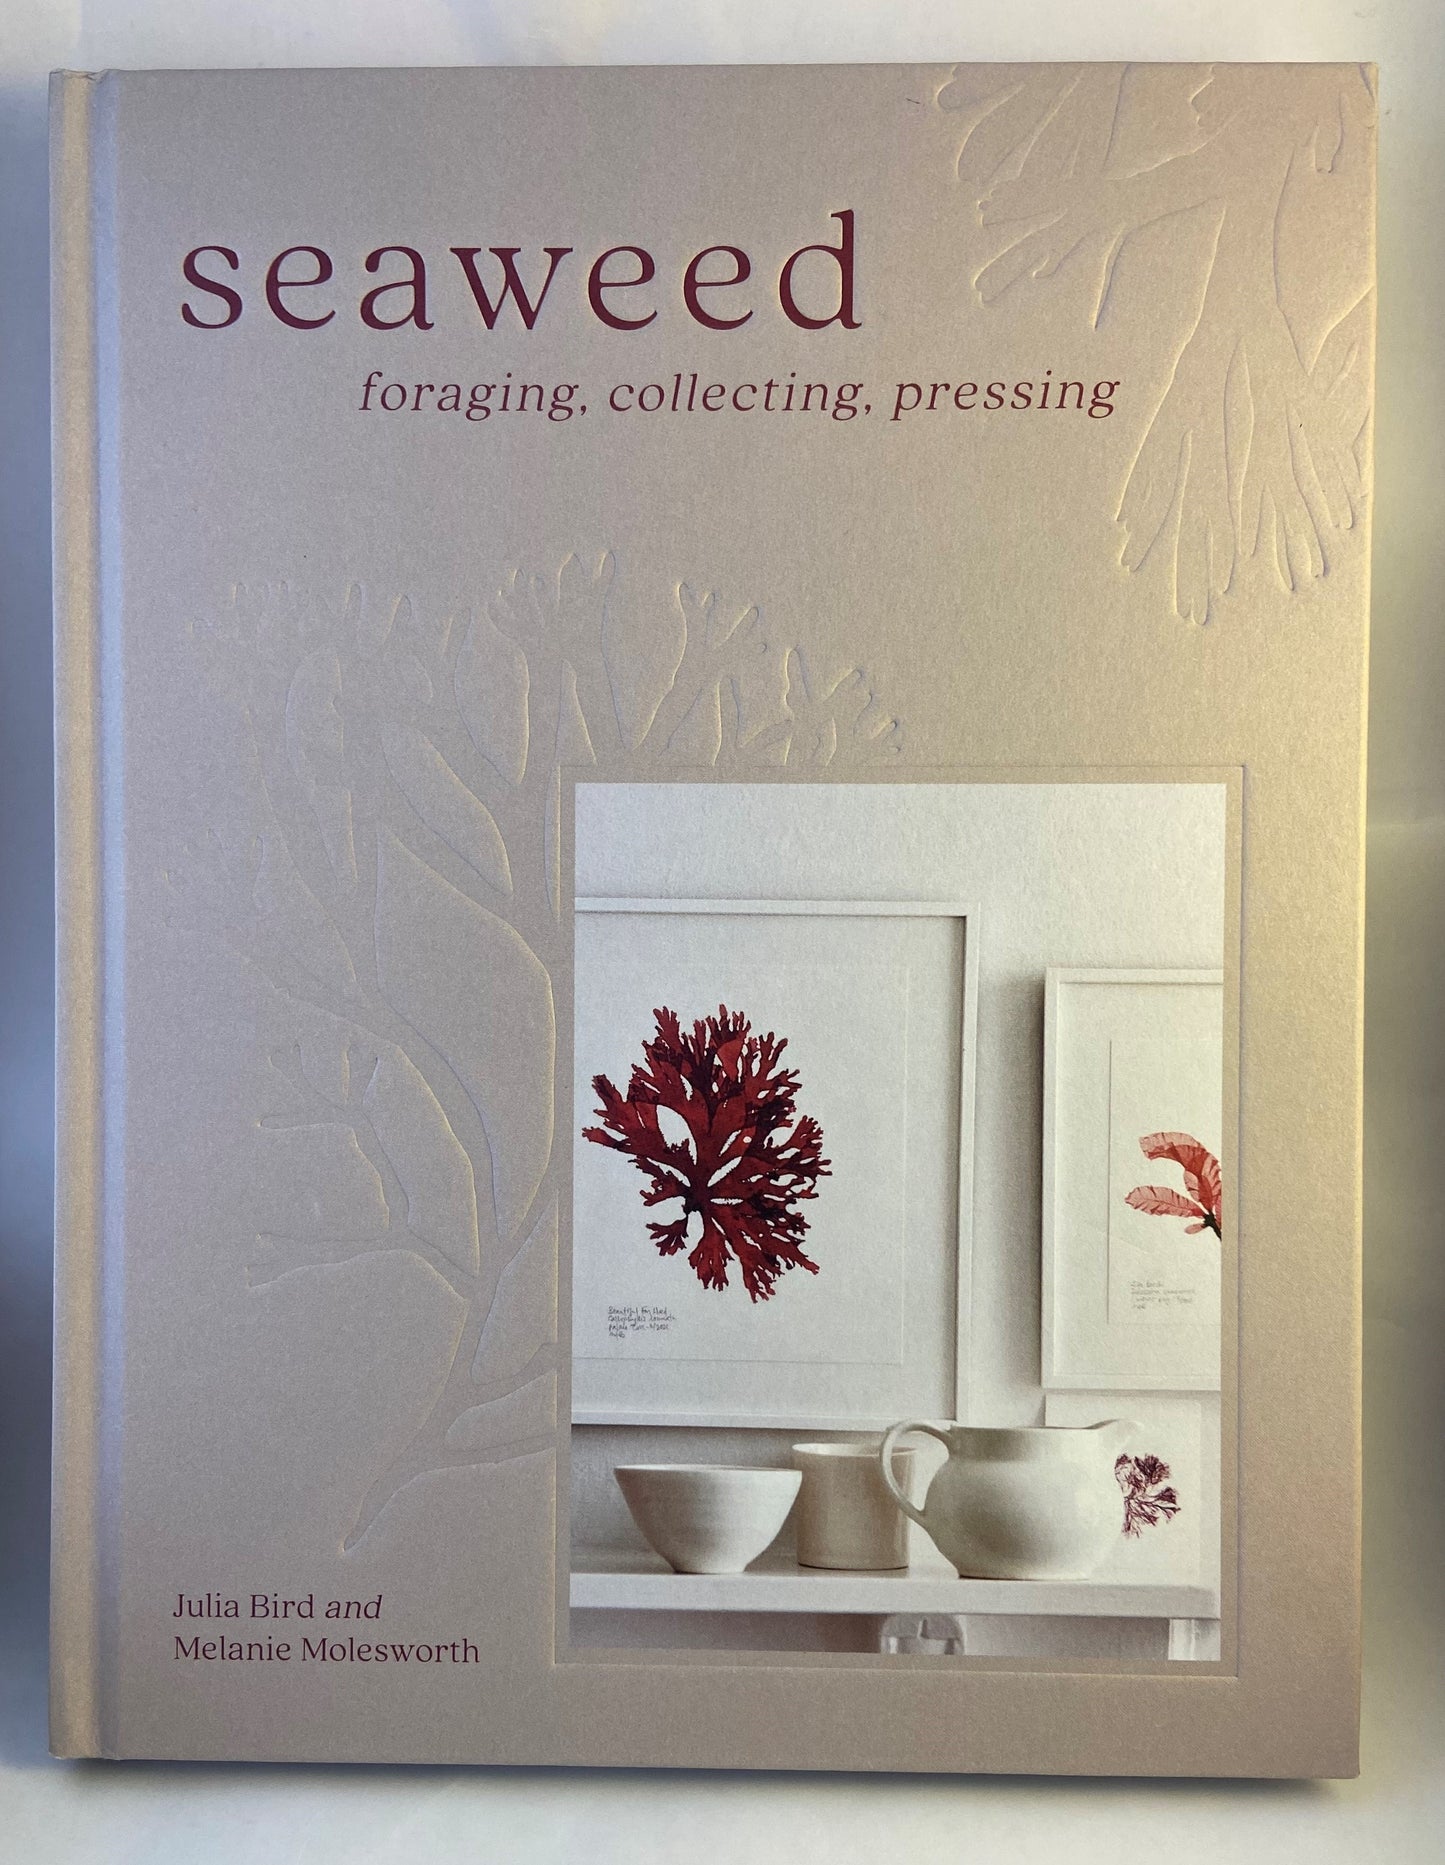 Seaweed: Foraging Collecting Pressing